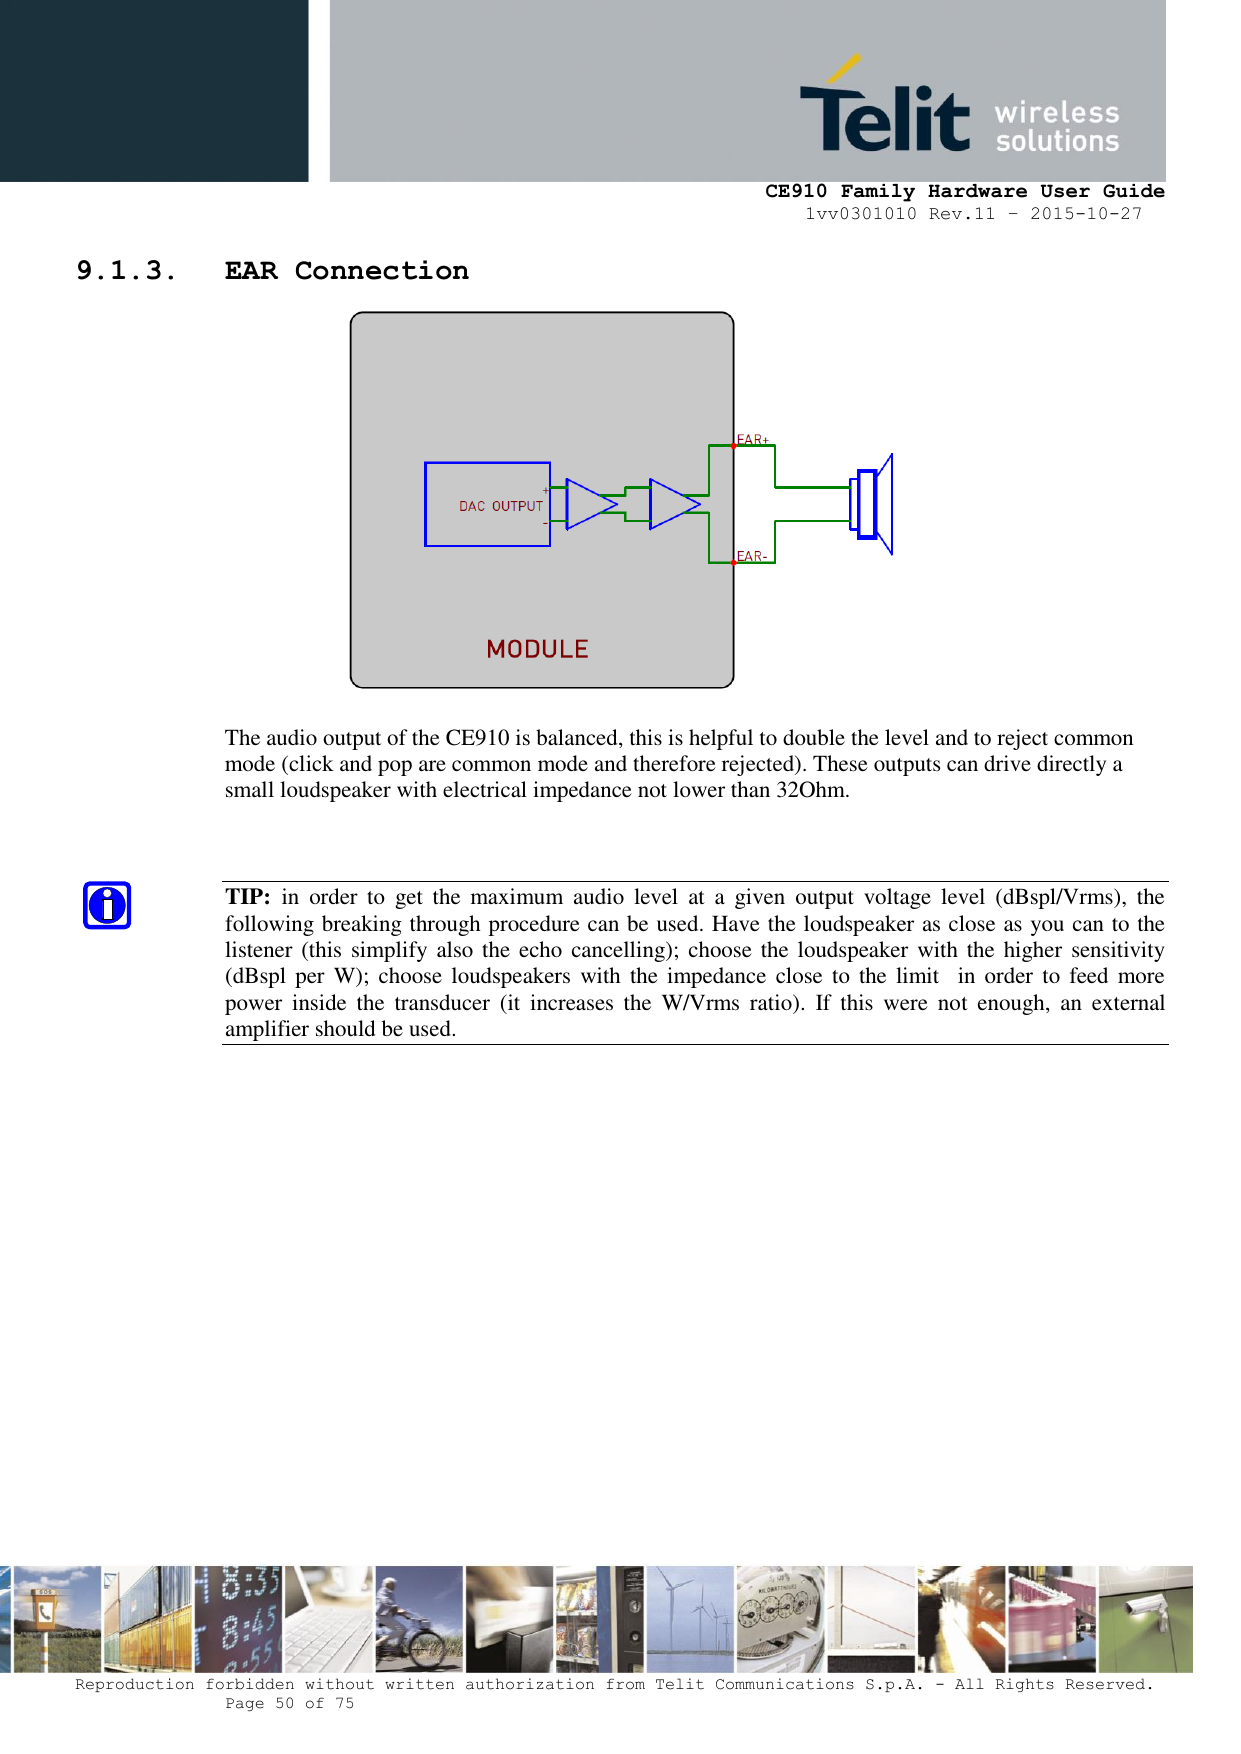     CE910 Family Hardware User Guide 1vv0301010 Rev.11 – 2015-10-27 Reproduction forbidden without written authorization from Telit Communications S.p.A. - All Rights Reserved.    Page 50 of 75                                                     9.1.3. EAR Connection   The audio output of the CE910 is balanced, this is helpful to double the level and to reject common mode (click and pop are common mode and therefore rejected). These outputs can drive directly a small loudspeaker with electrical impedance not lower than 32Ohm.   TIP:  in  order  to  get  the  maximum  audio  level  at  a  given  output  voltage  level  (dBspl/Vrms),  the following breaking through procedure can be used. Have the loudspeaker as close as you can to the listener (this simplify also the echo cancelling); choose the loudspeaker with the higher sensitivity (dBspl per  W); choose loudspeakers  with  the impedance  close to  the limit    in order to  feed more power  inside  the  transducer  (it  increases  the  W/Vrms  ratio).  If  this  were  not  enough,  an  external amplifier should be used.                  